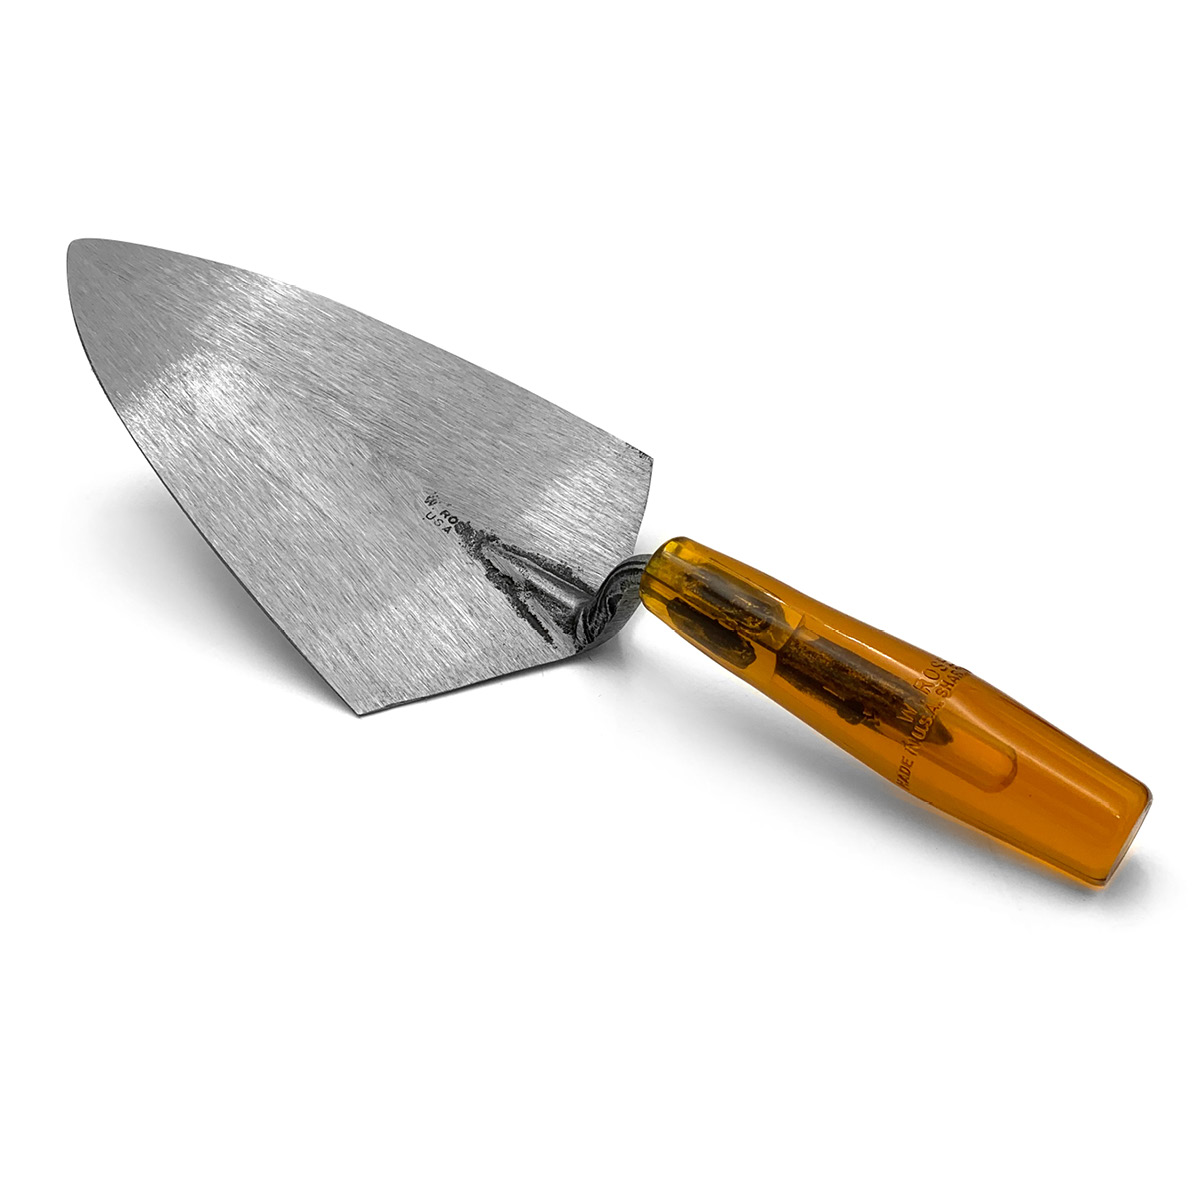 W.rose Philadelphia brick trowels made from a single piece of specially forged steel for extra strength. These American made trowels can be purchased in the United Kingdom via Speedcrete who sell masonry professional tools.